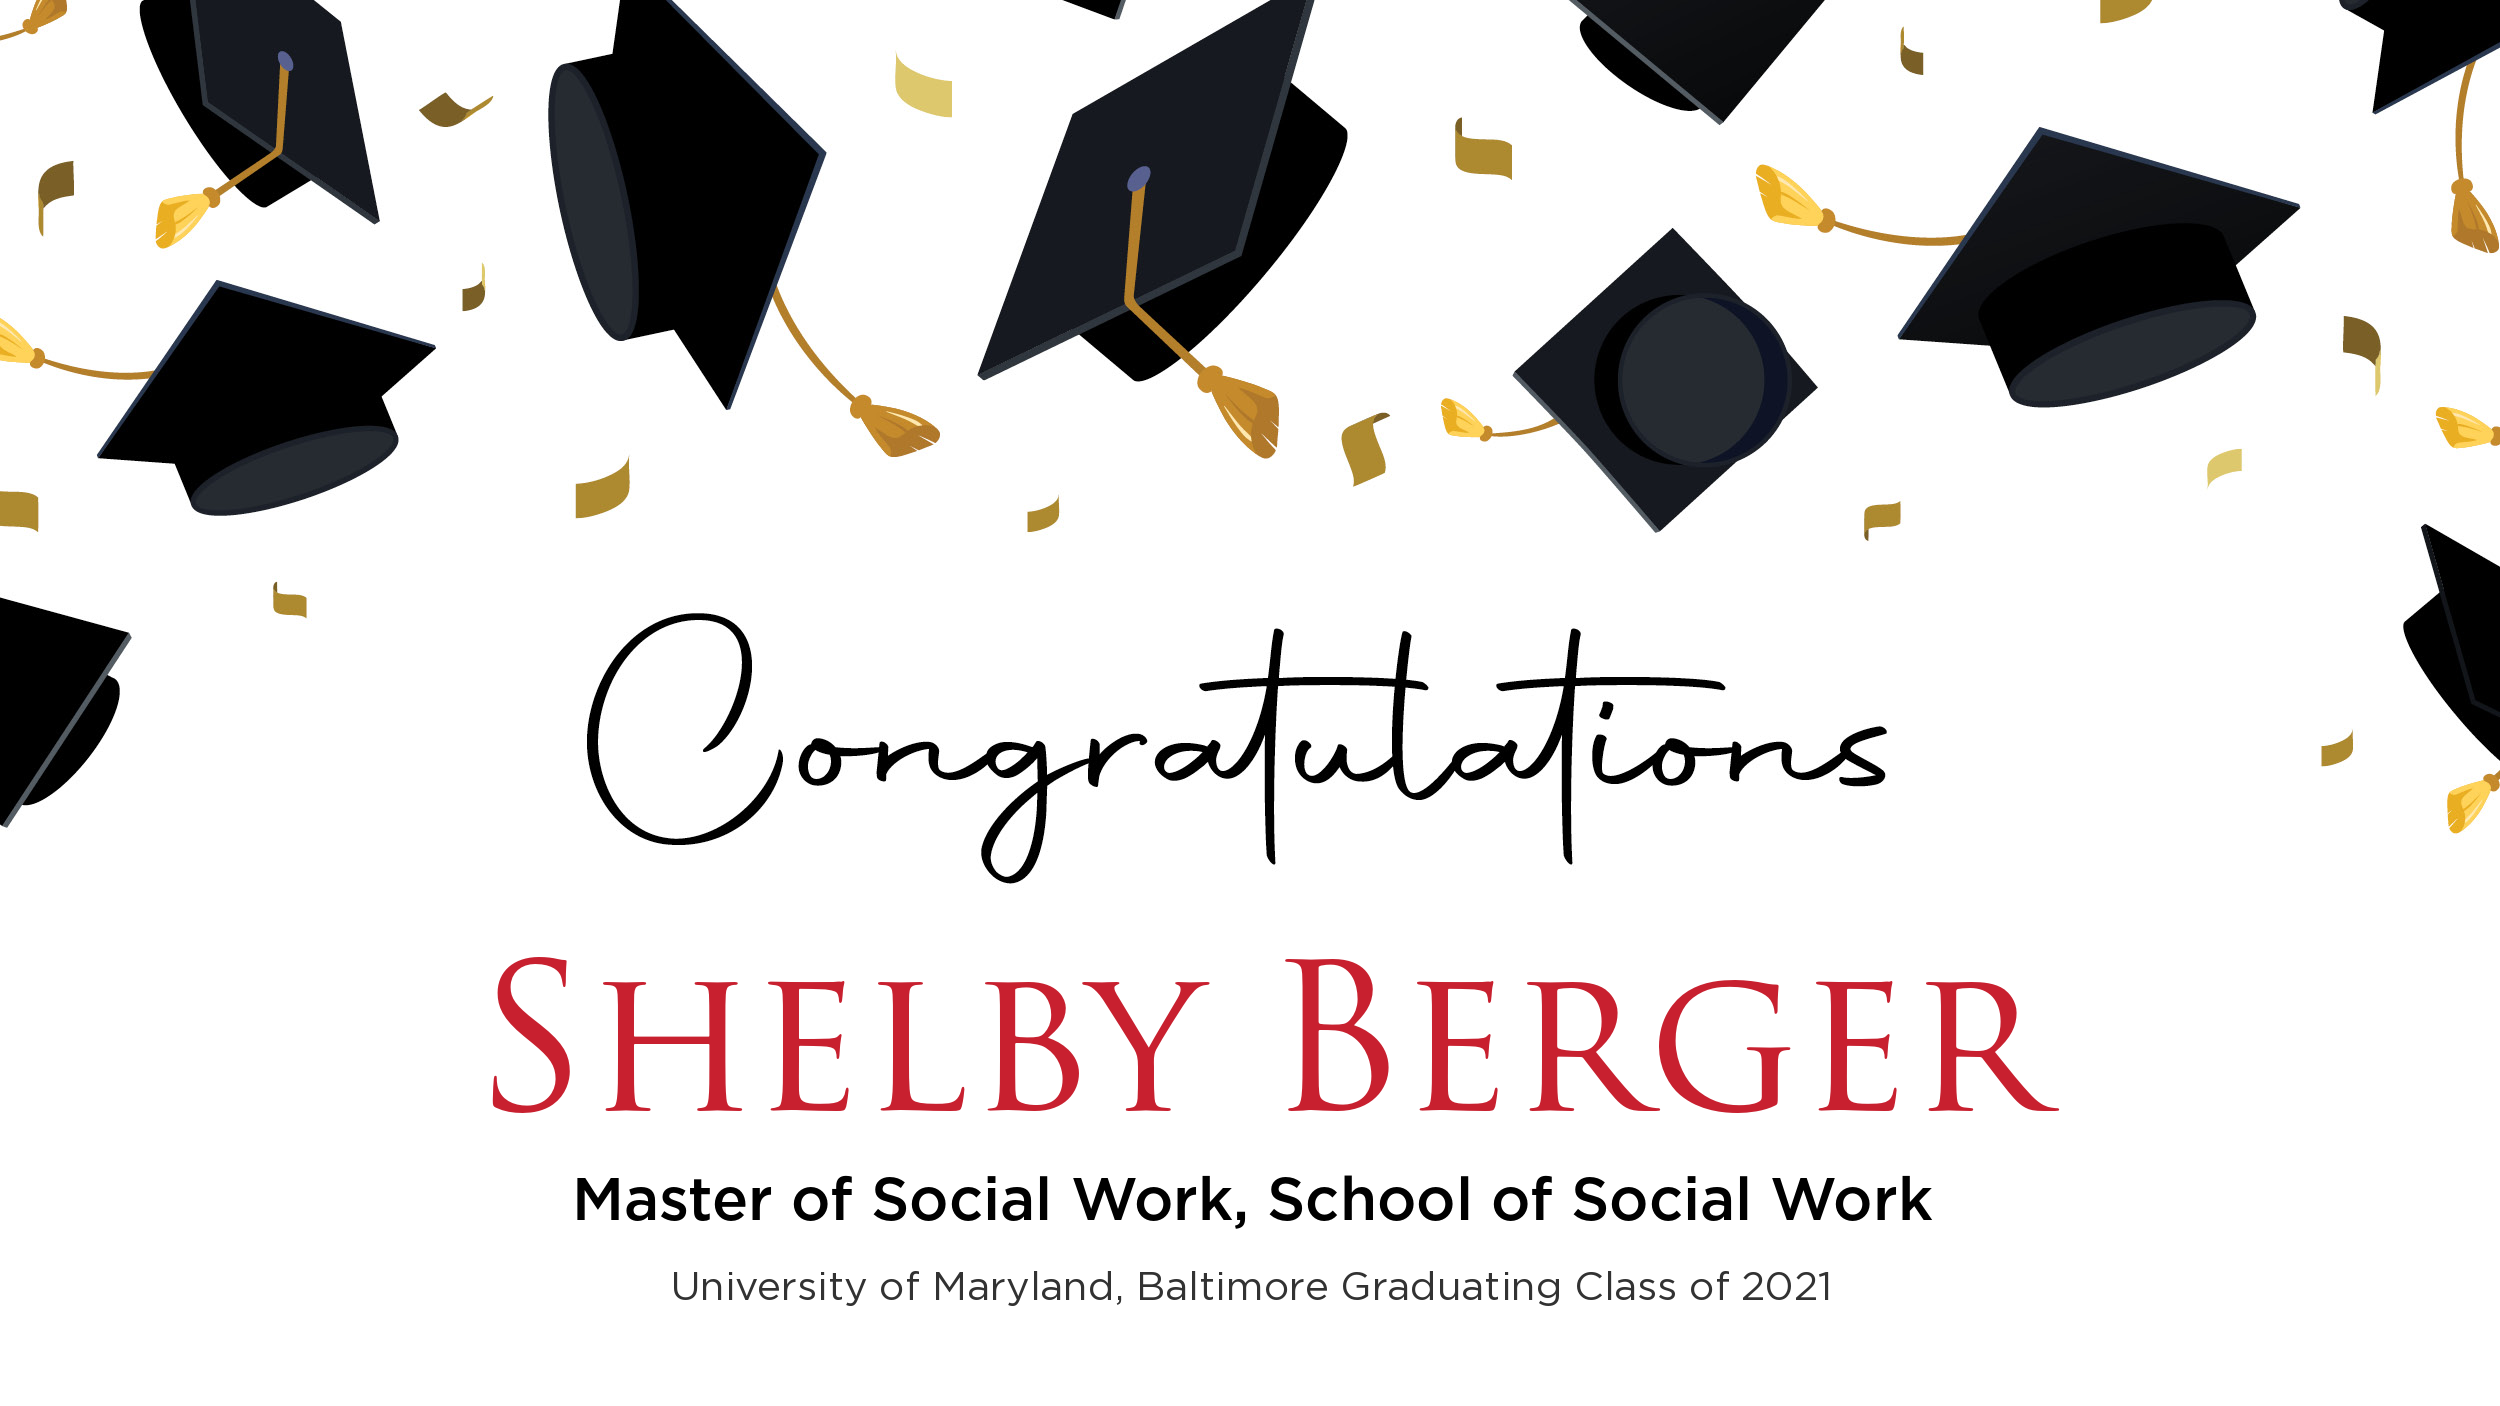 Congratulations Shelby Berger, Master of Social Work